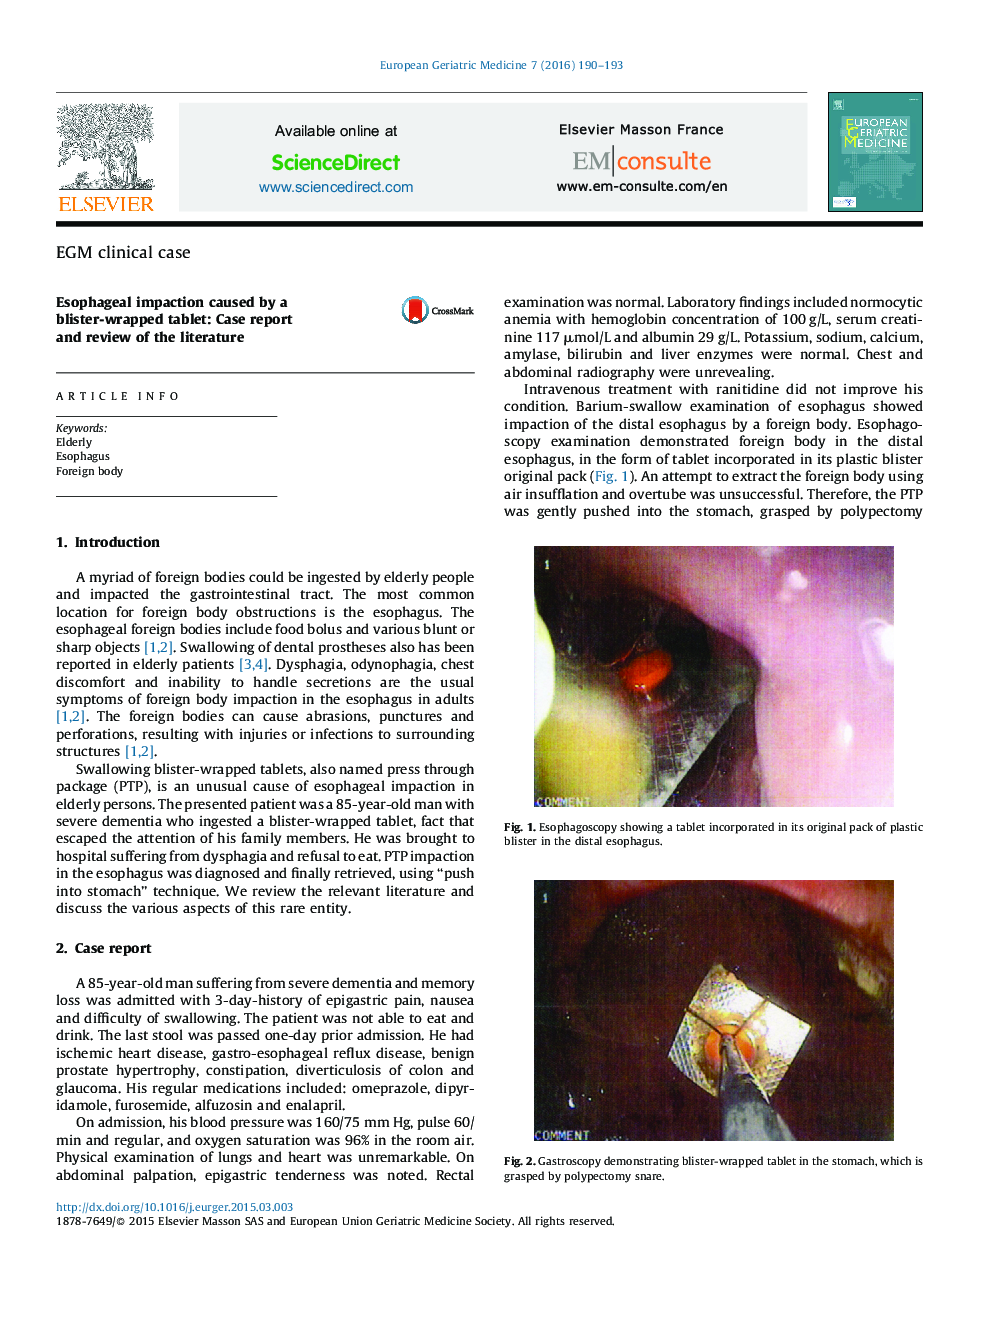 Esophageal impaction caused by a blister-wrapped tablet: Case report and review of the literature